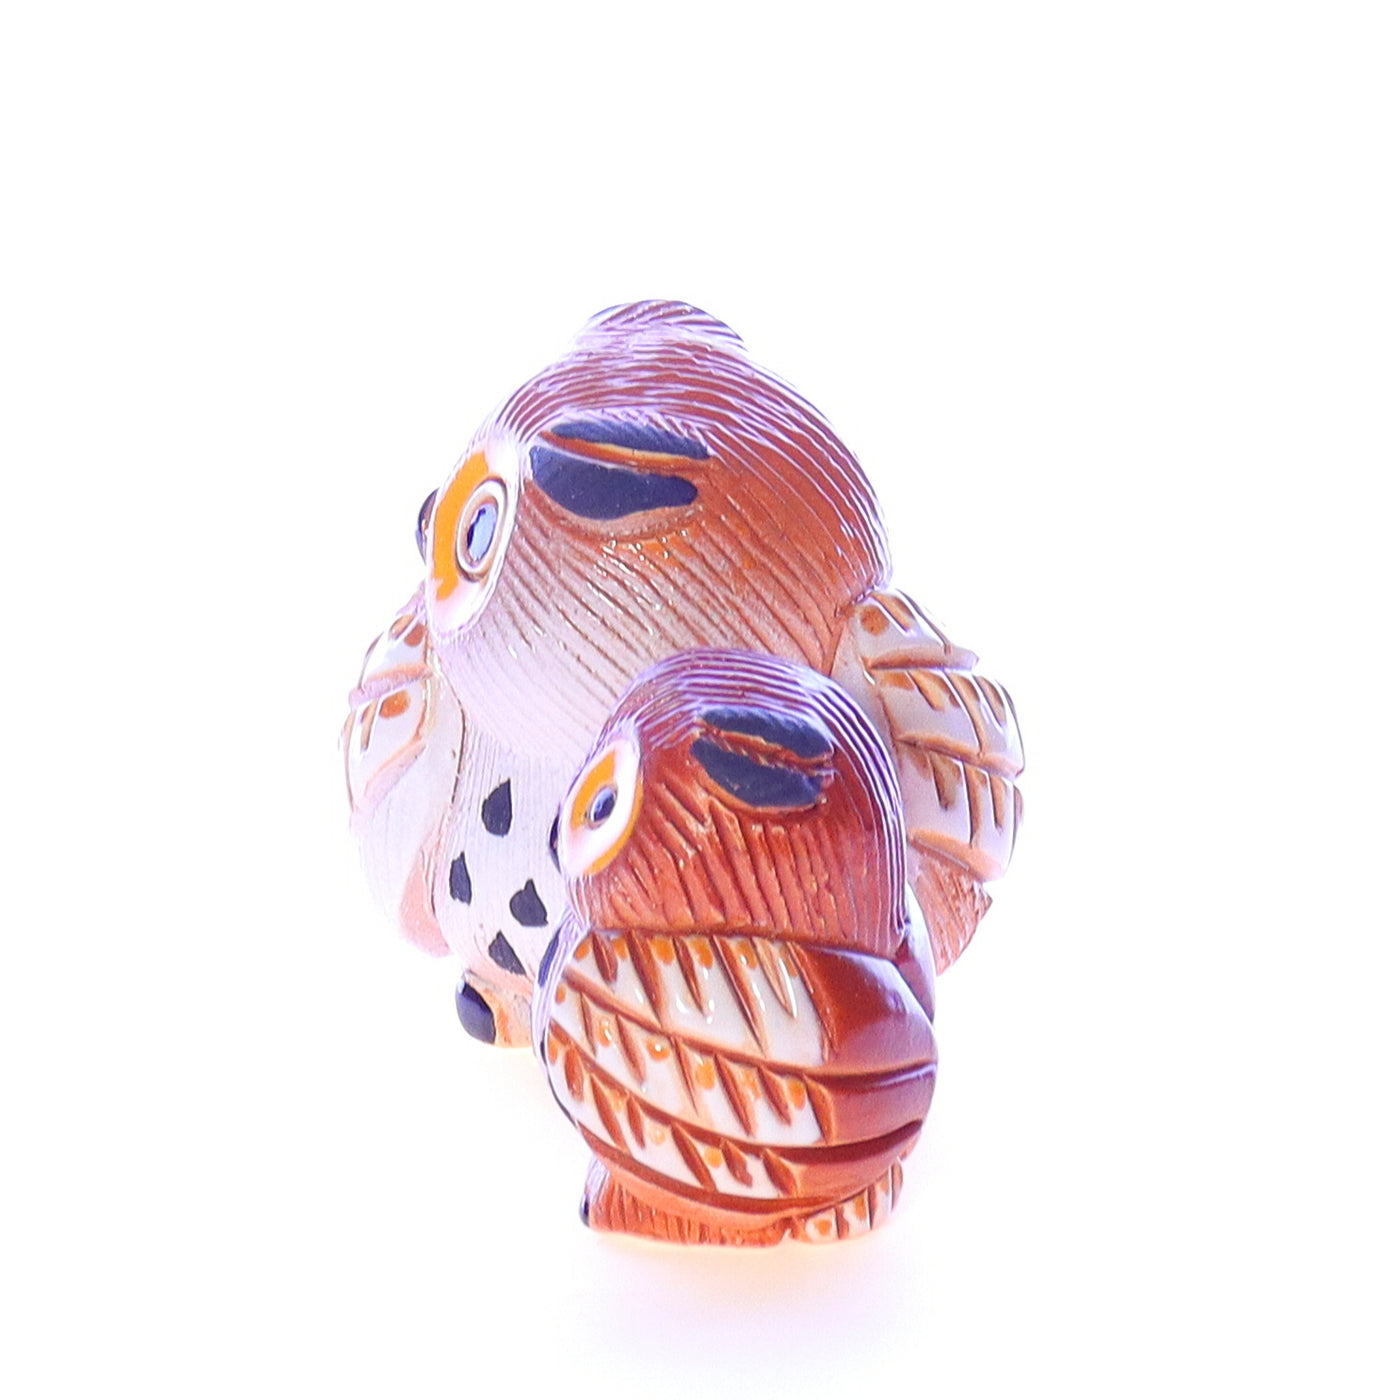 Artesania_Rinconada_Yellow_Eyed_Speckled_Black_Owl_and_Baby_Owl_Figurine Left Side View